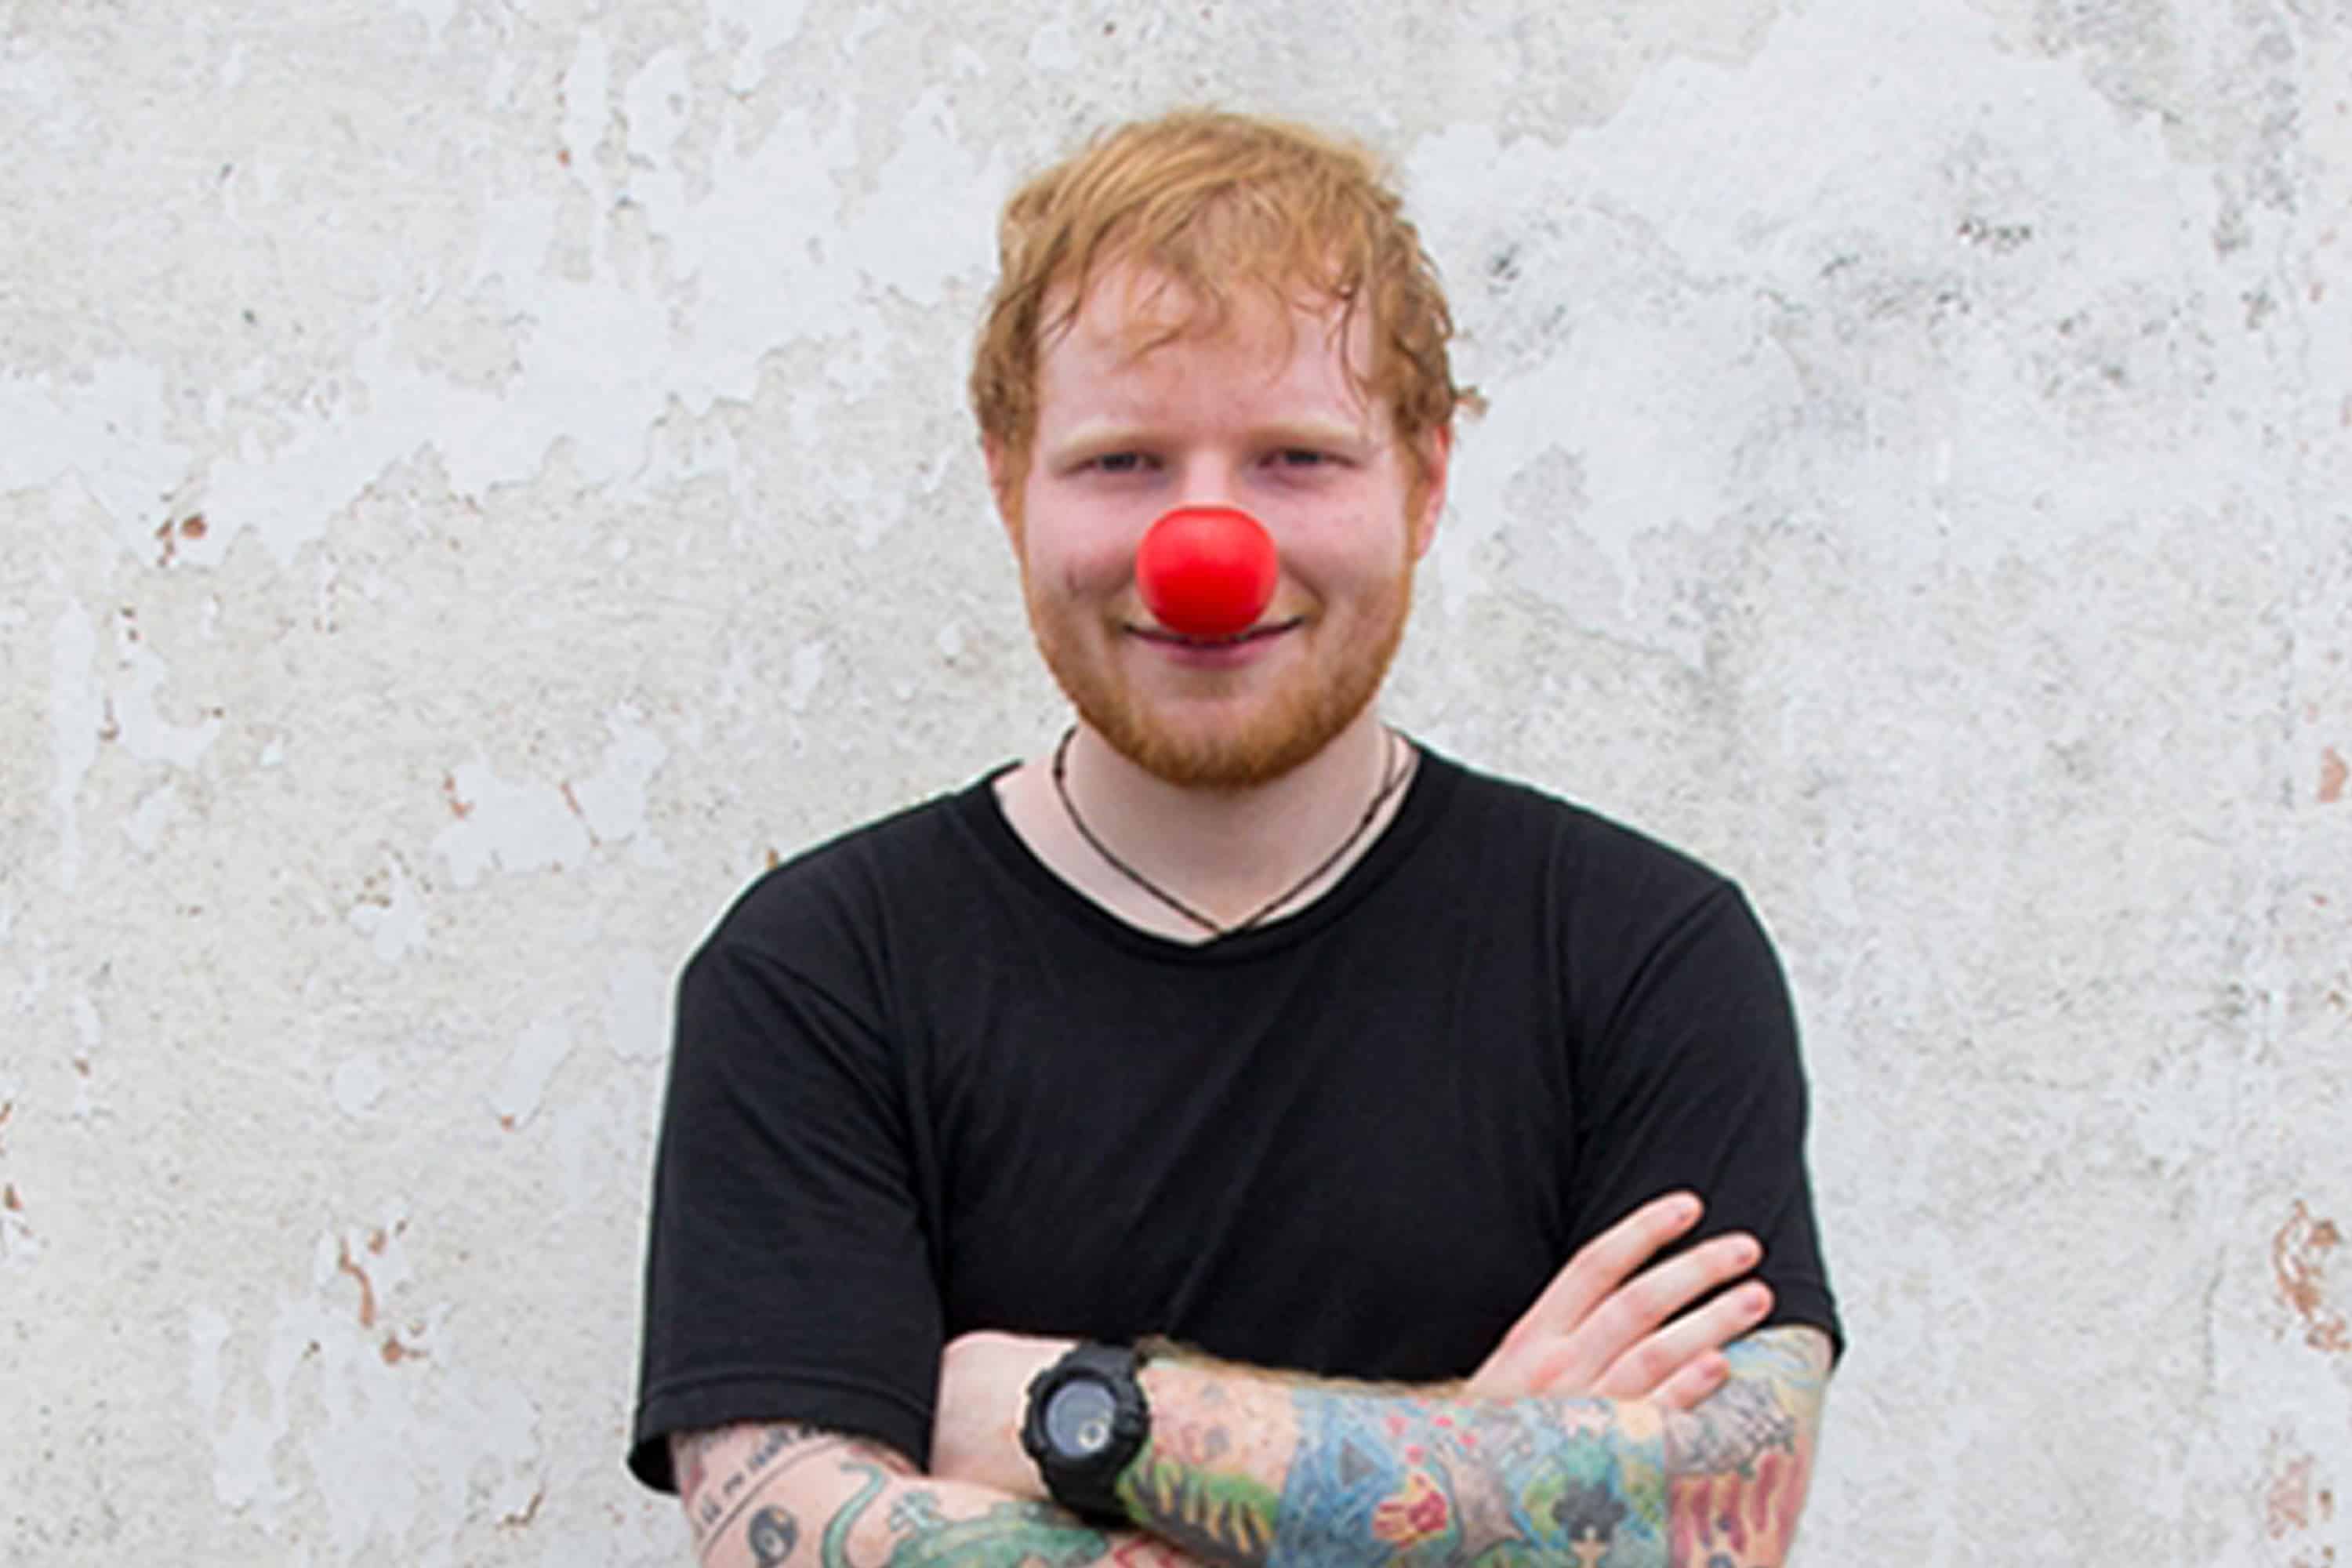 Ed Sheeran posts with Red Nose for Red Nose Day